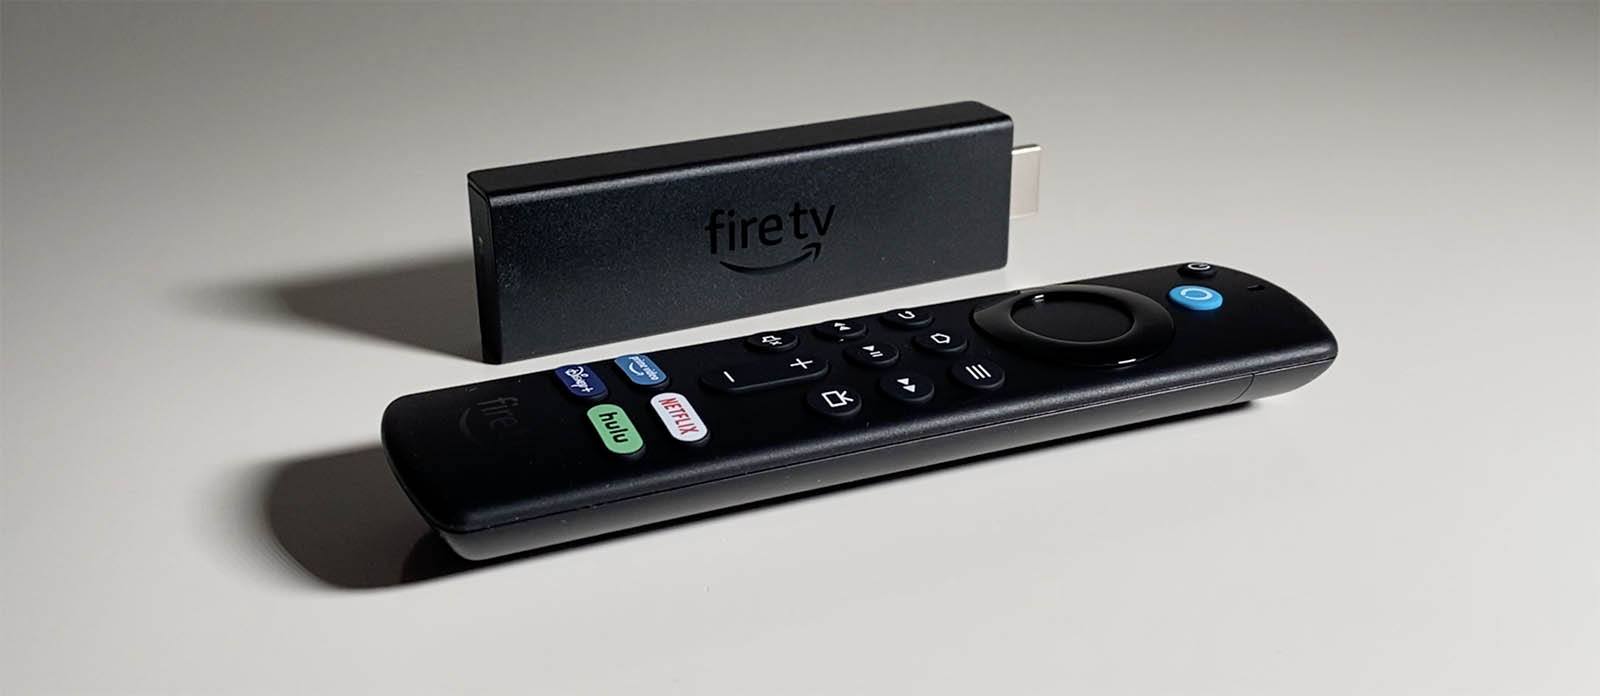 Deal Alert: The Fire TV Stick is On Sale For Just $29.99